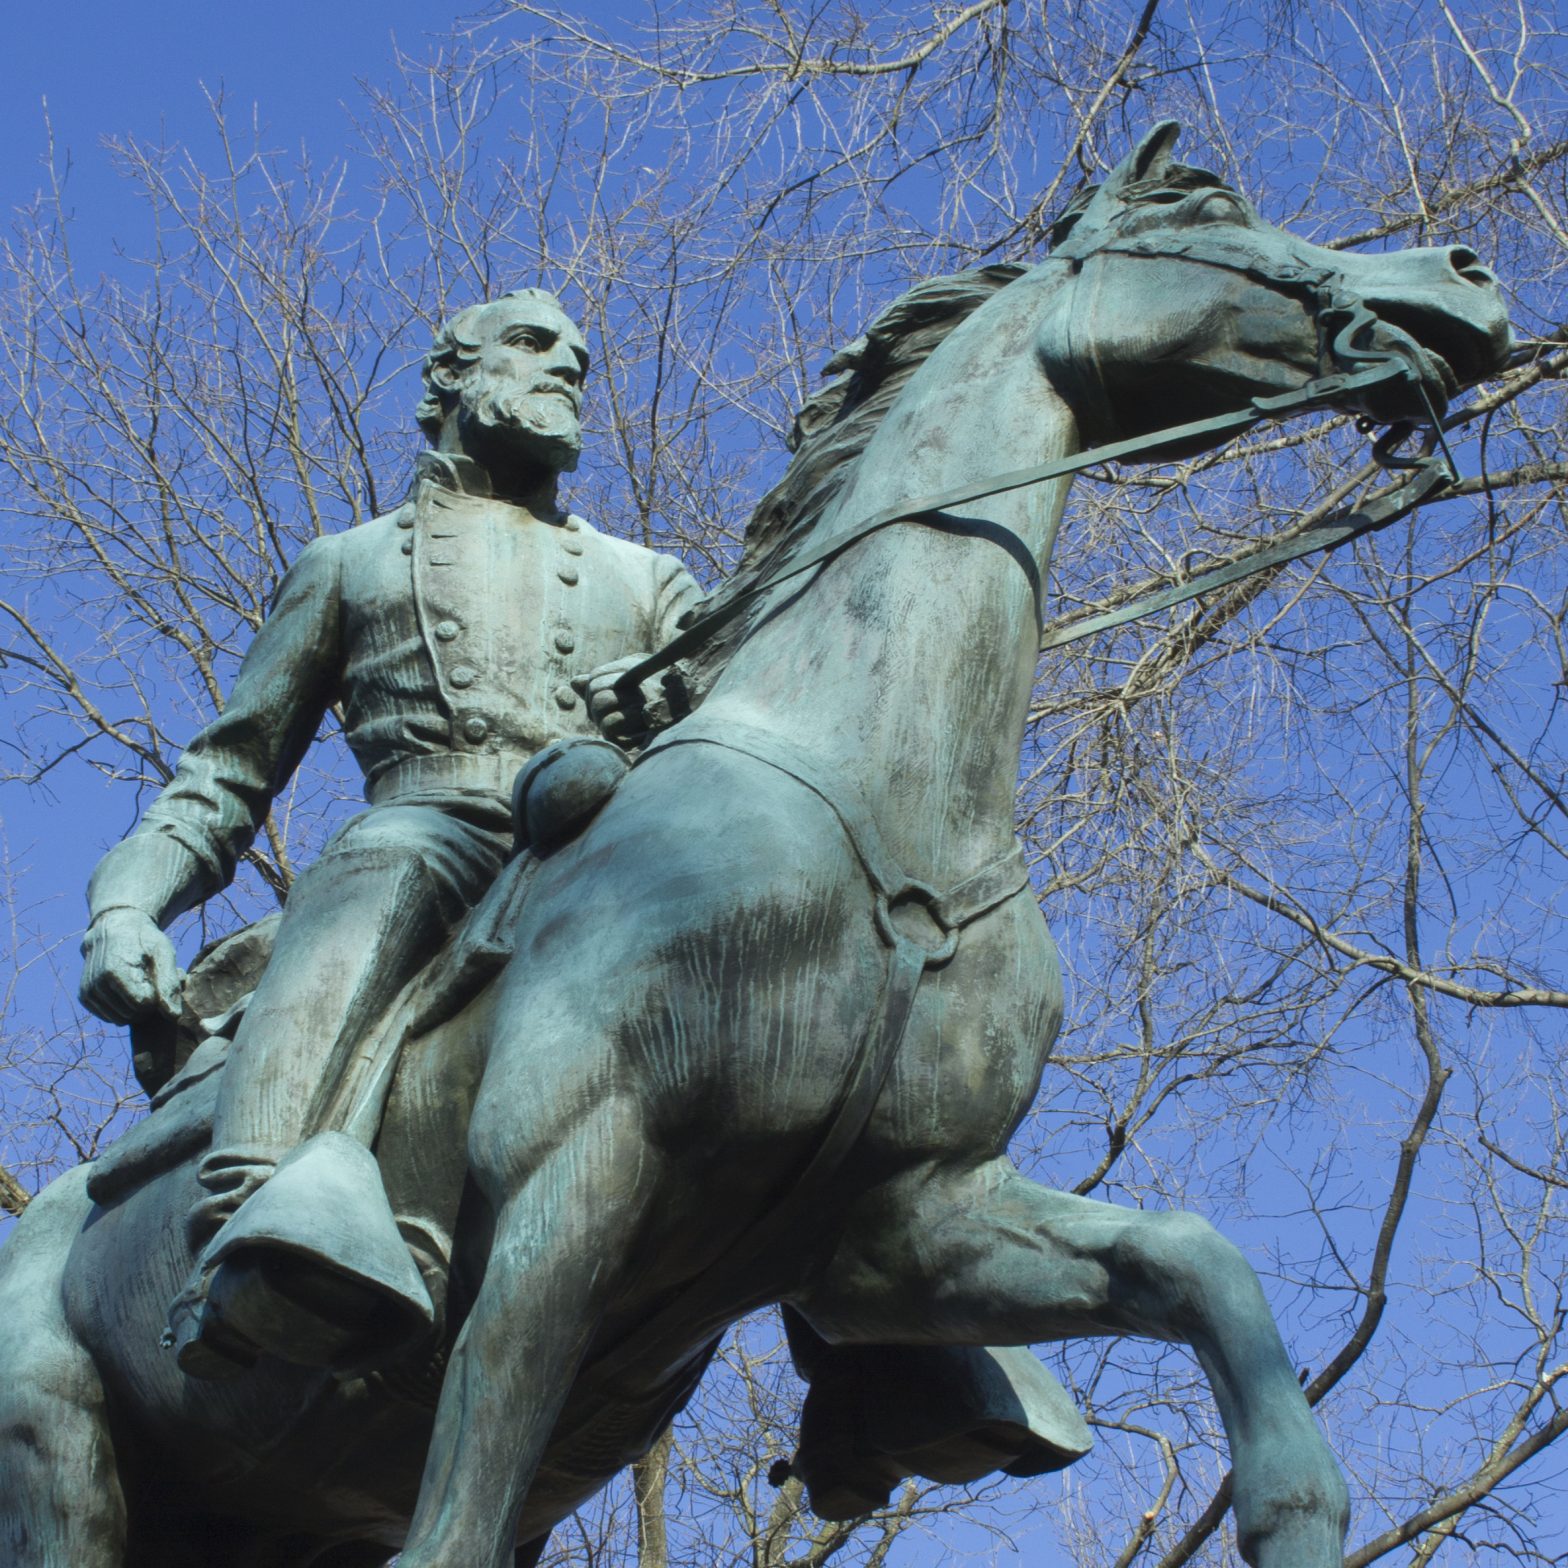 Bronze statue of Confederate General Stonewall Jackson riding a horse